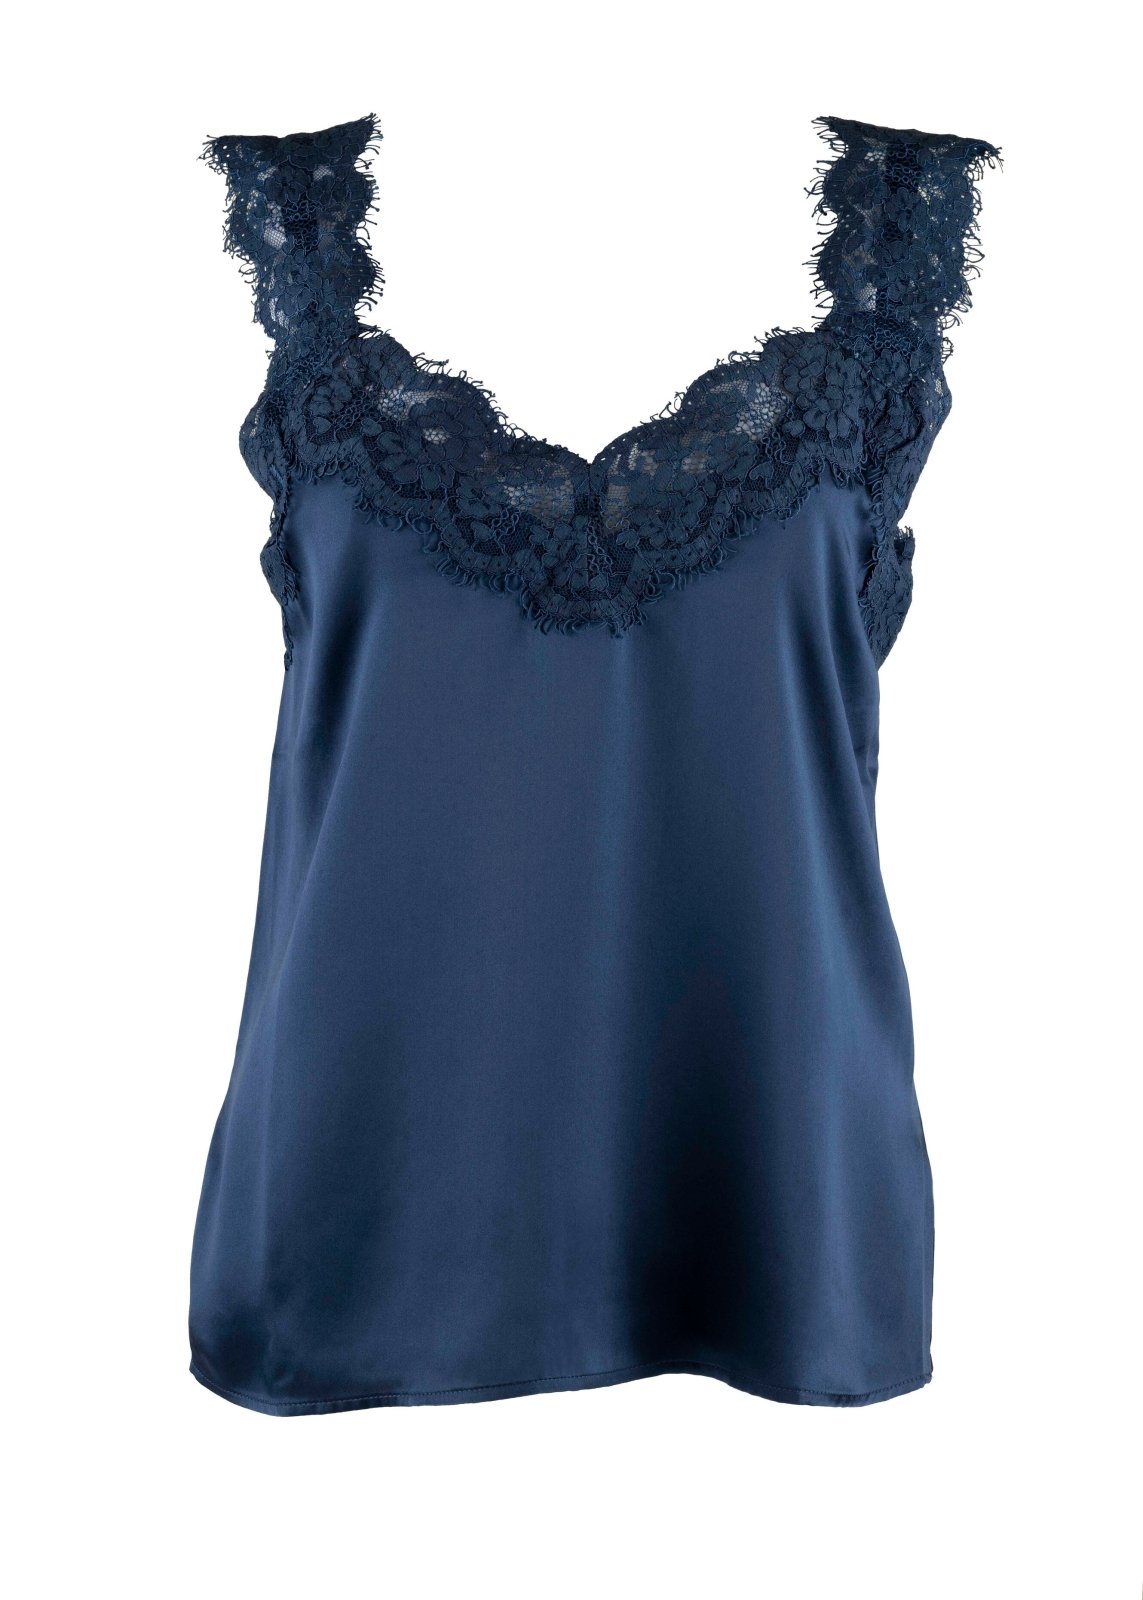 Silk satin camisole in navy blue with French lace – Ariane Delarue Lingerie